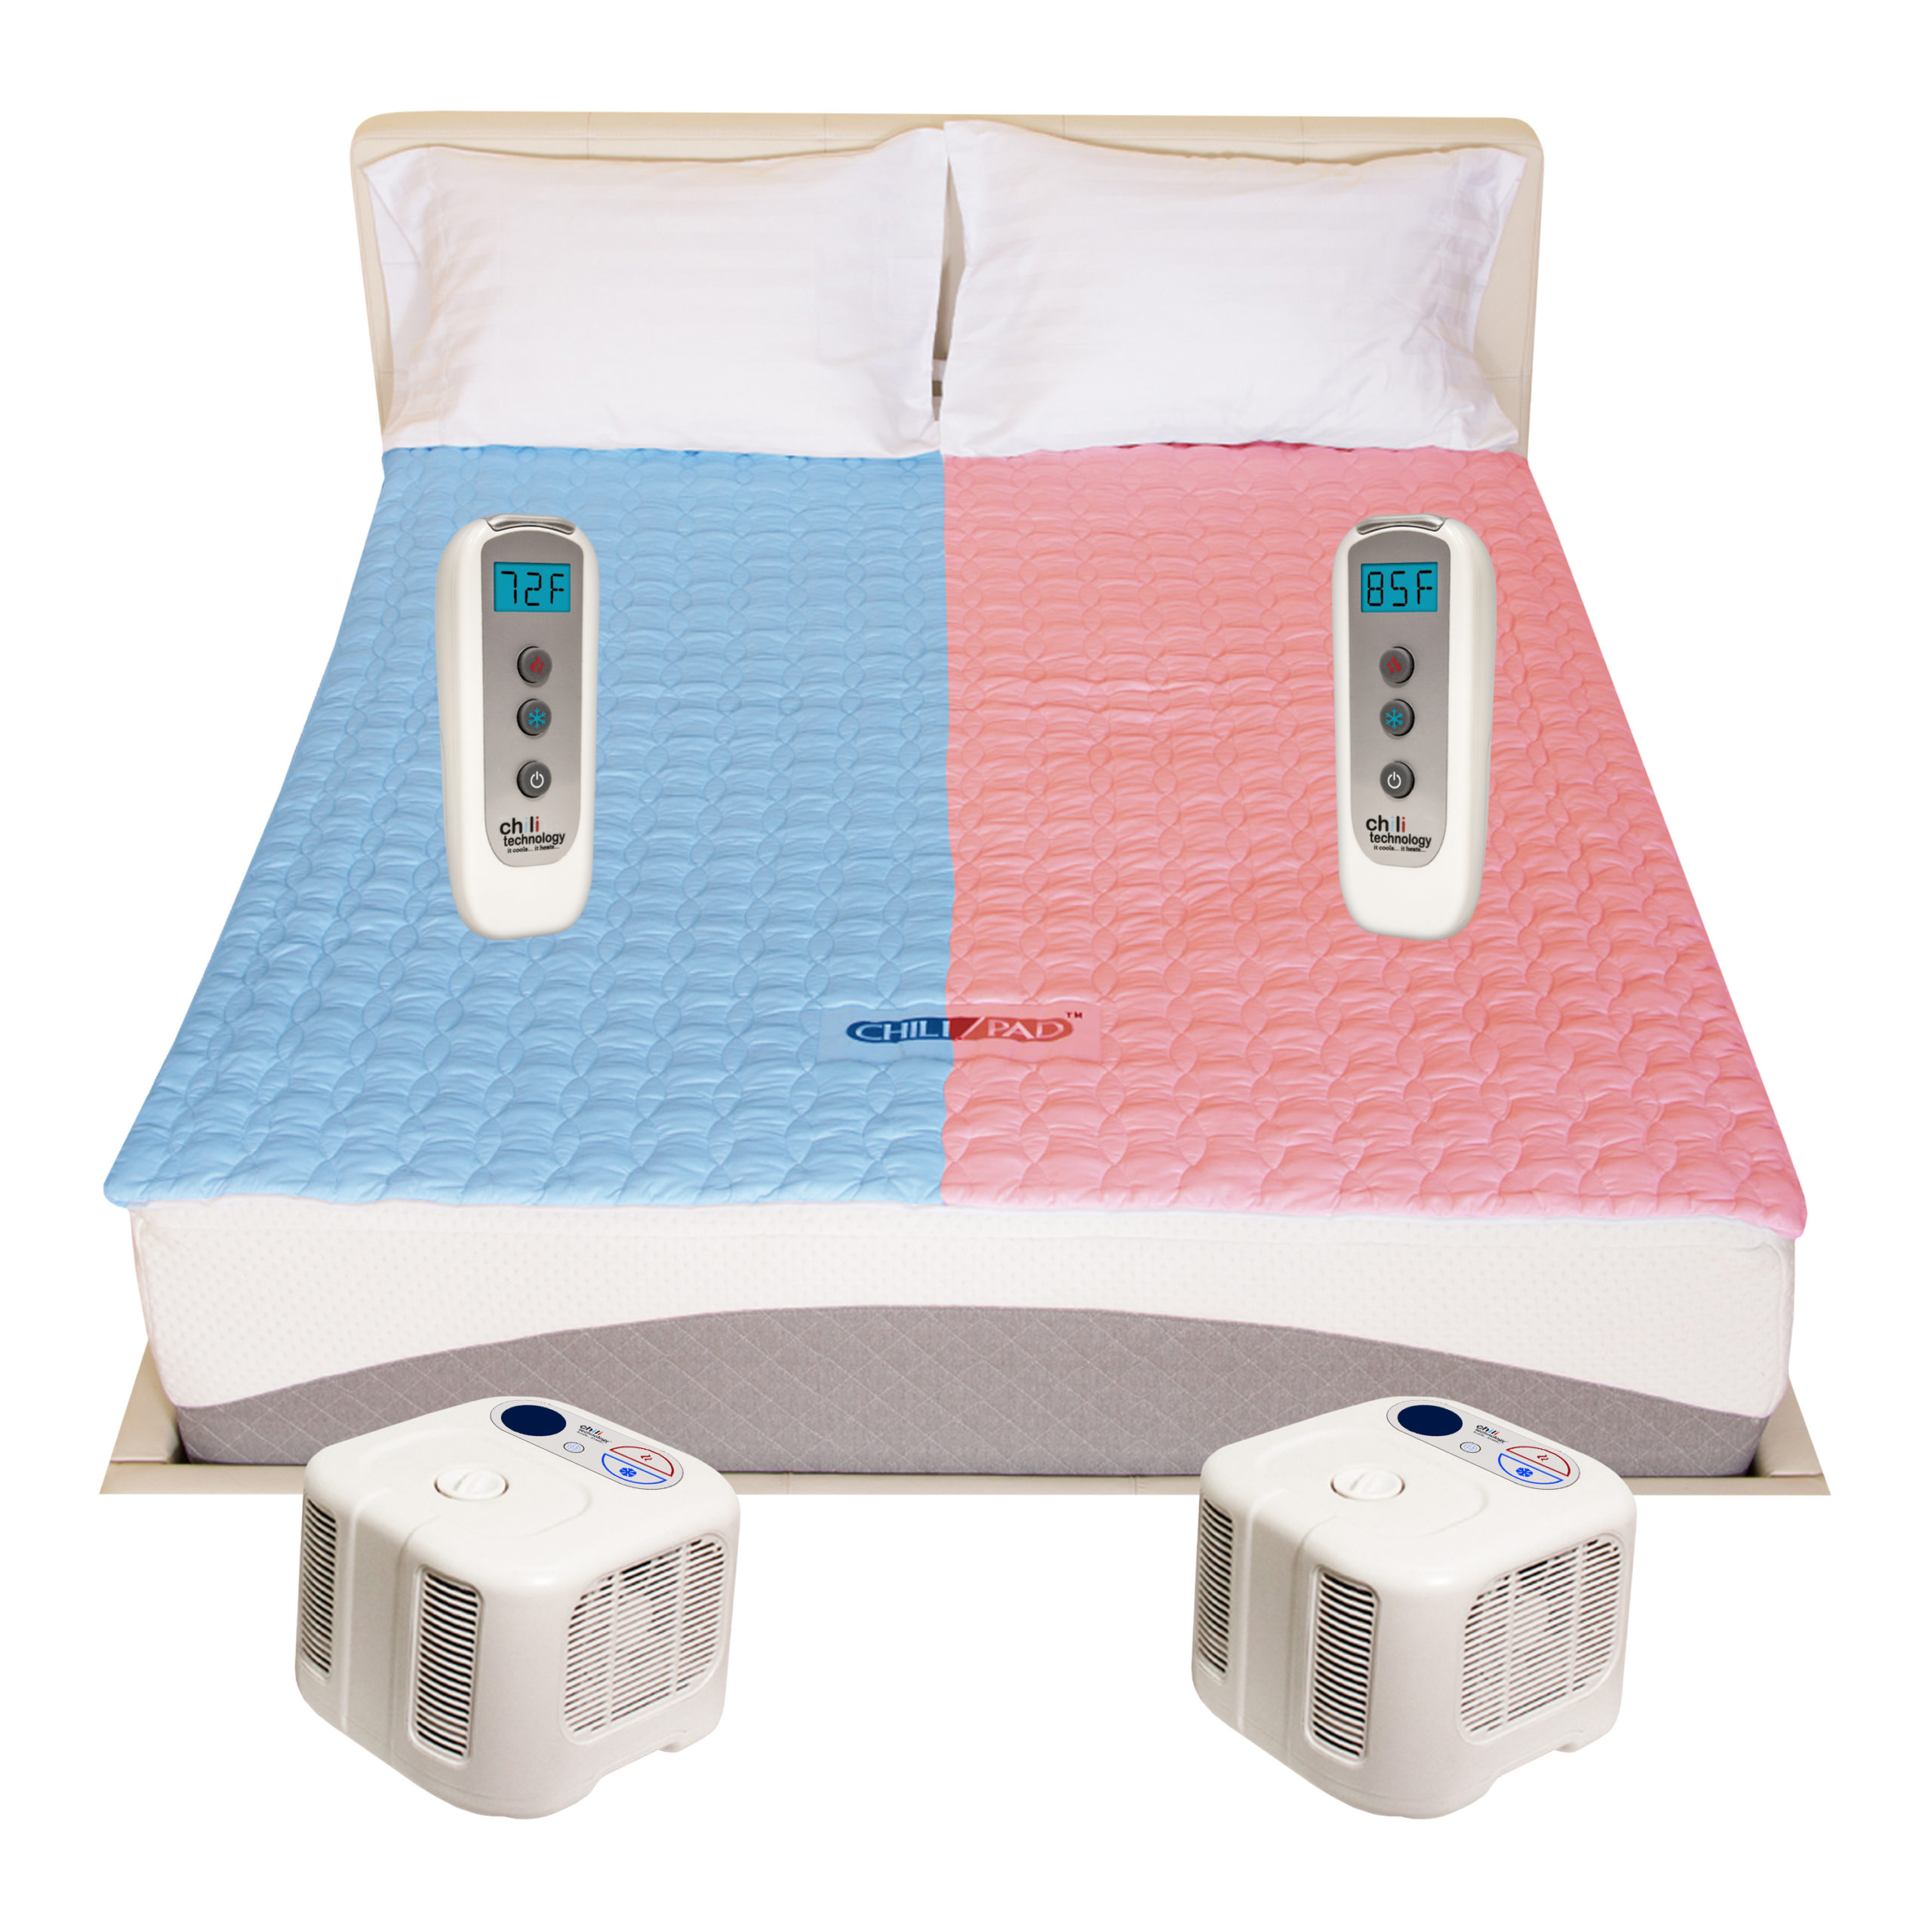 Ac Pads Near Me - Chilipad|Temperature|Mattress|Cube|Sleep|Bed|Water|System|Pad|Ooler|Control|Unit|Night|Bedjet|Technology|Side|Air|Product|Review|Body|Time|Degrees|Noise|Price|Pod|Tubes|Heat|Device|Cooling|Room|King|App|Features|Size|Cover|Sleepers|Sheets|Energy|Warranty|Quality|Mattress Pad|Control Unit|Cube Sleep System|Sleep Pod|Distilled Water|Remote Control|Sleep System|Desired Temperature|Water Tank|Chilipad Cube|Chili Technology|Deep Sleep|Pro Cover|Ooler Sleep System|Hydrogen Peroxide|Cool Mesh|Sleep Temperature|Fitted Sheet|Pod Pro|Sleep Quality|Smartphone App|Sleep Systems|Chilipad Sleep System|New Mattress|Sleep Trial|Full Refund|Mattress Topper|Body Heat|Air Flow|Chilipad Review